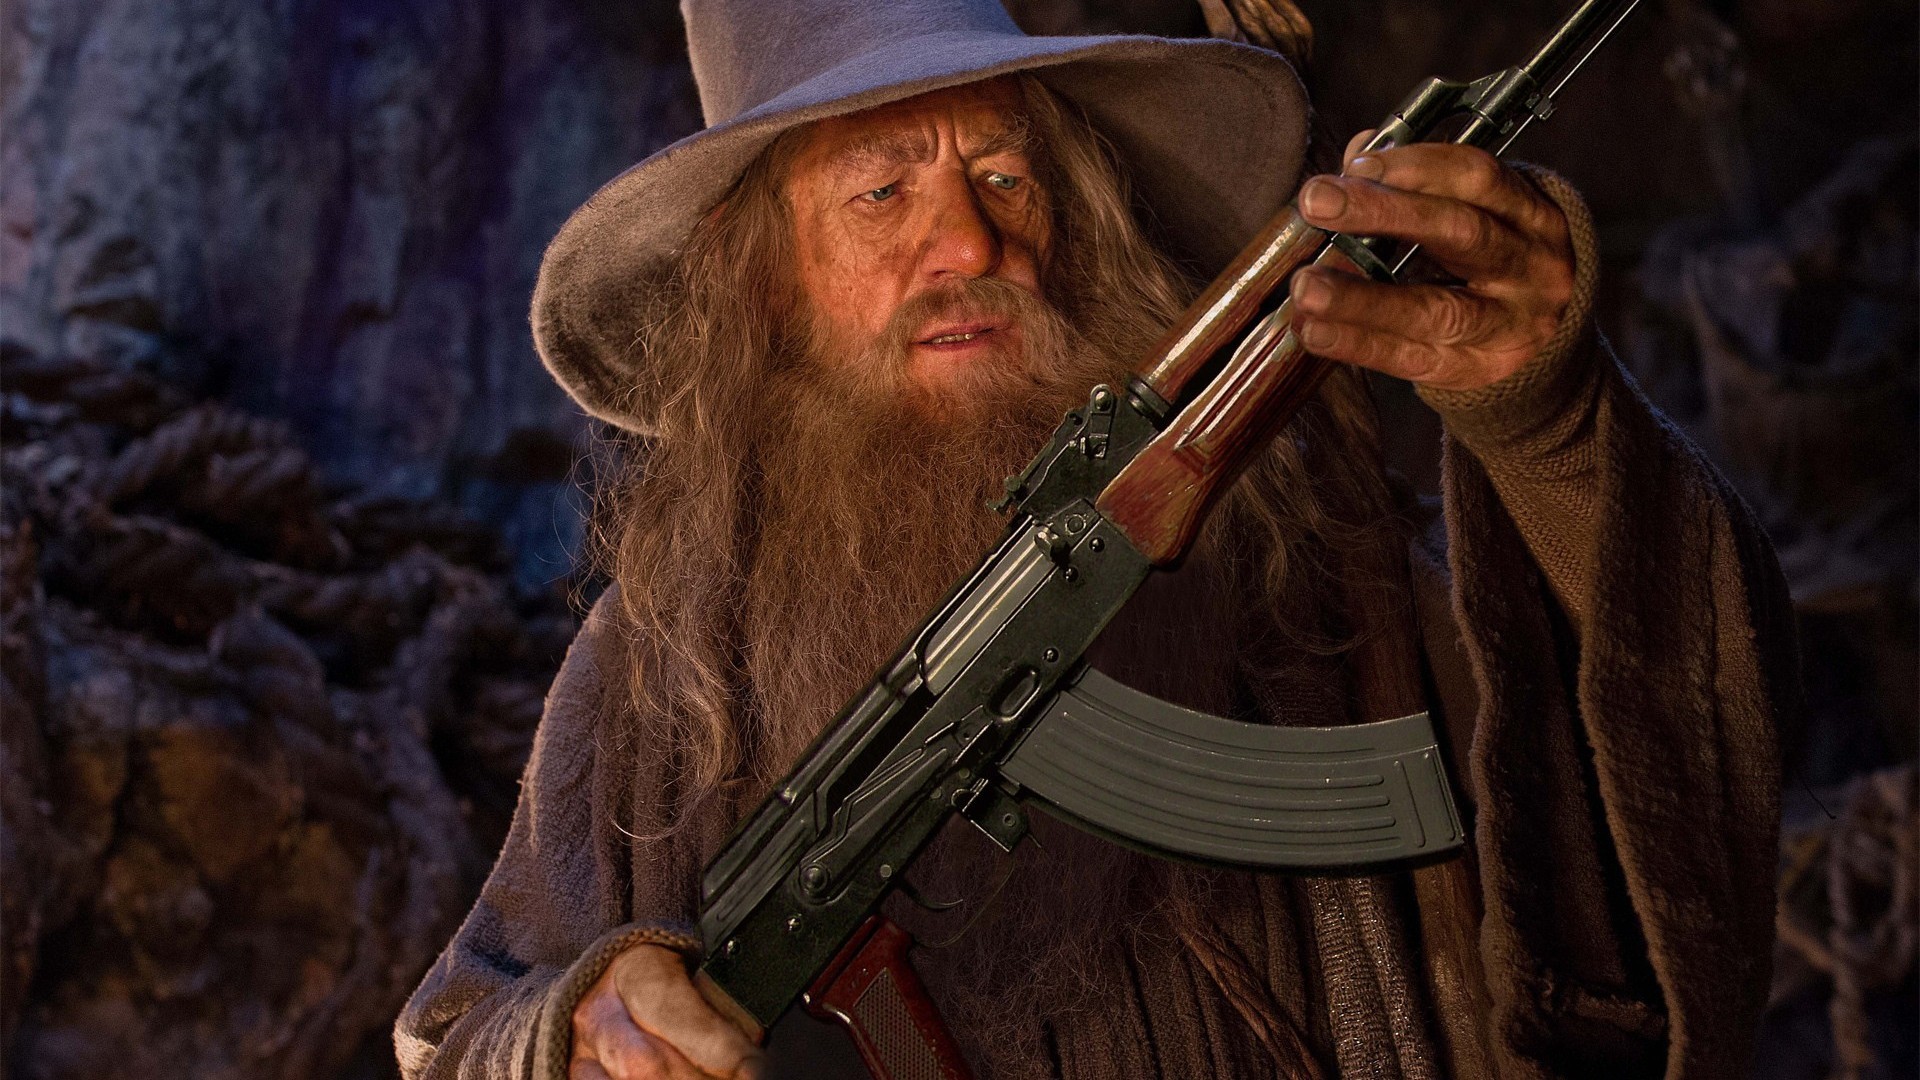 People 1920x1080 The Lord of the Rings Gandalf photo manipulation humor AKM men